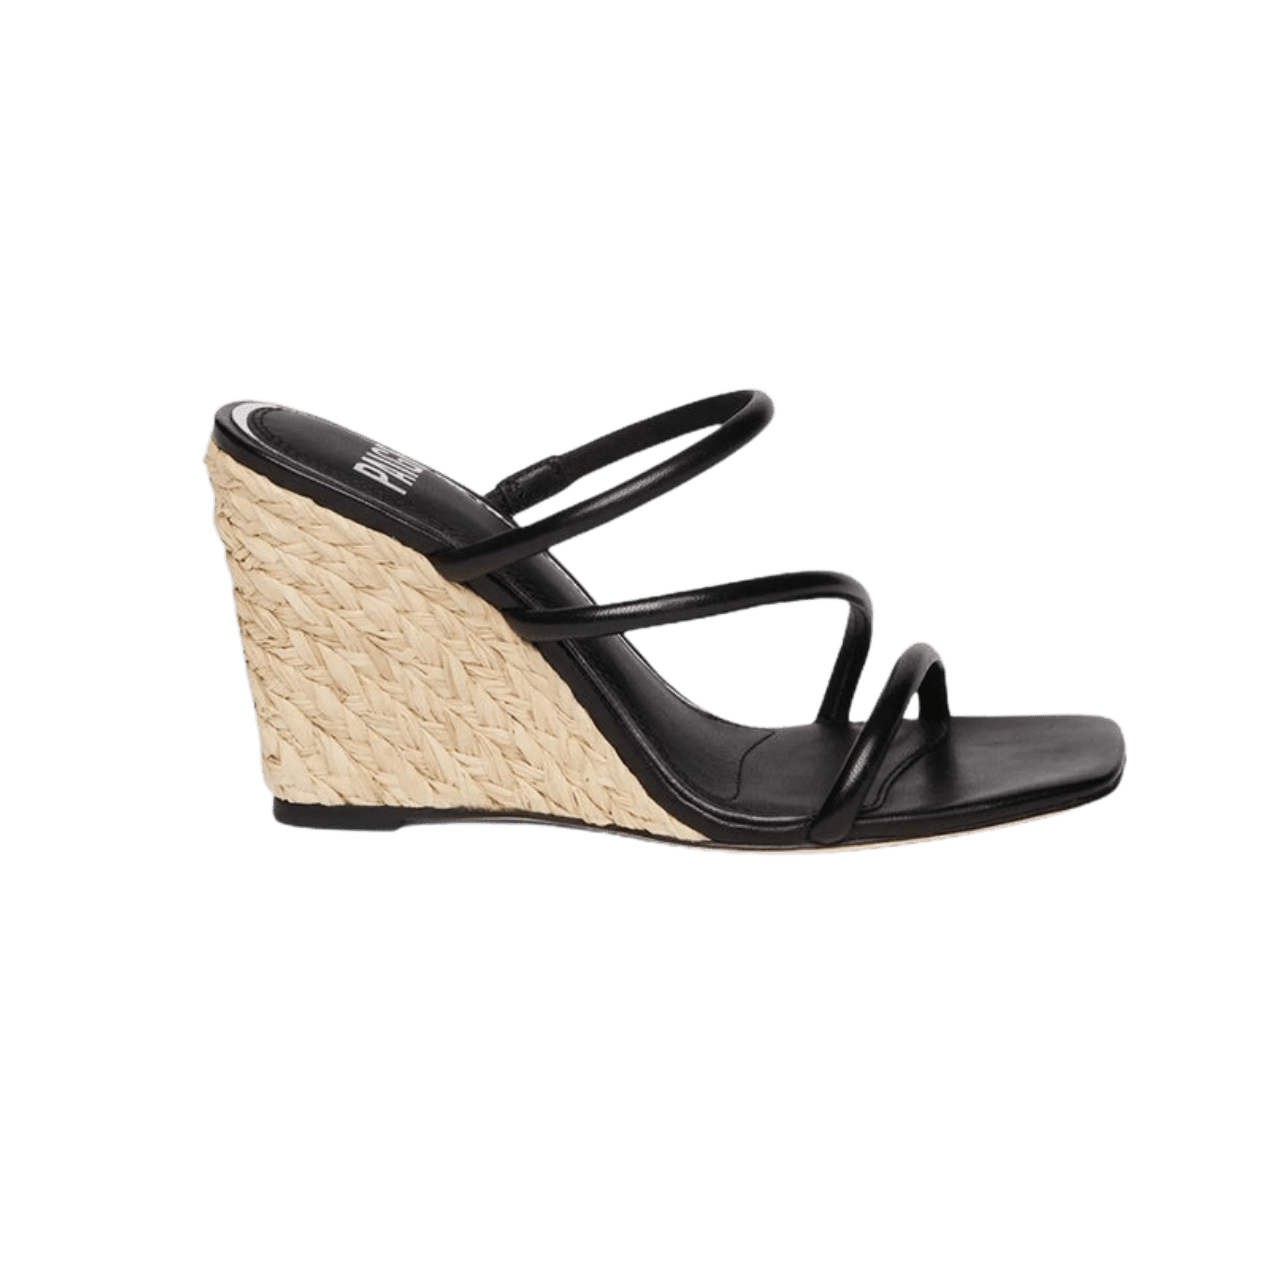 Paige Stacey three-band wedge espadrilles